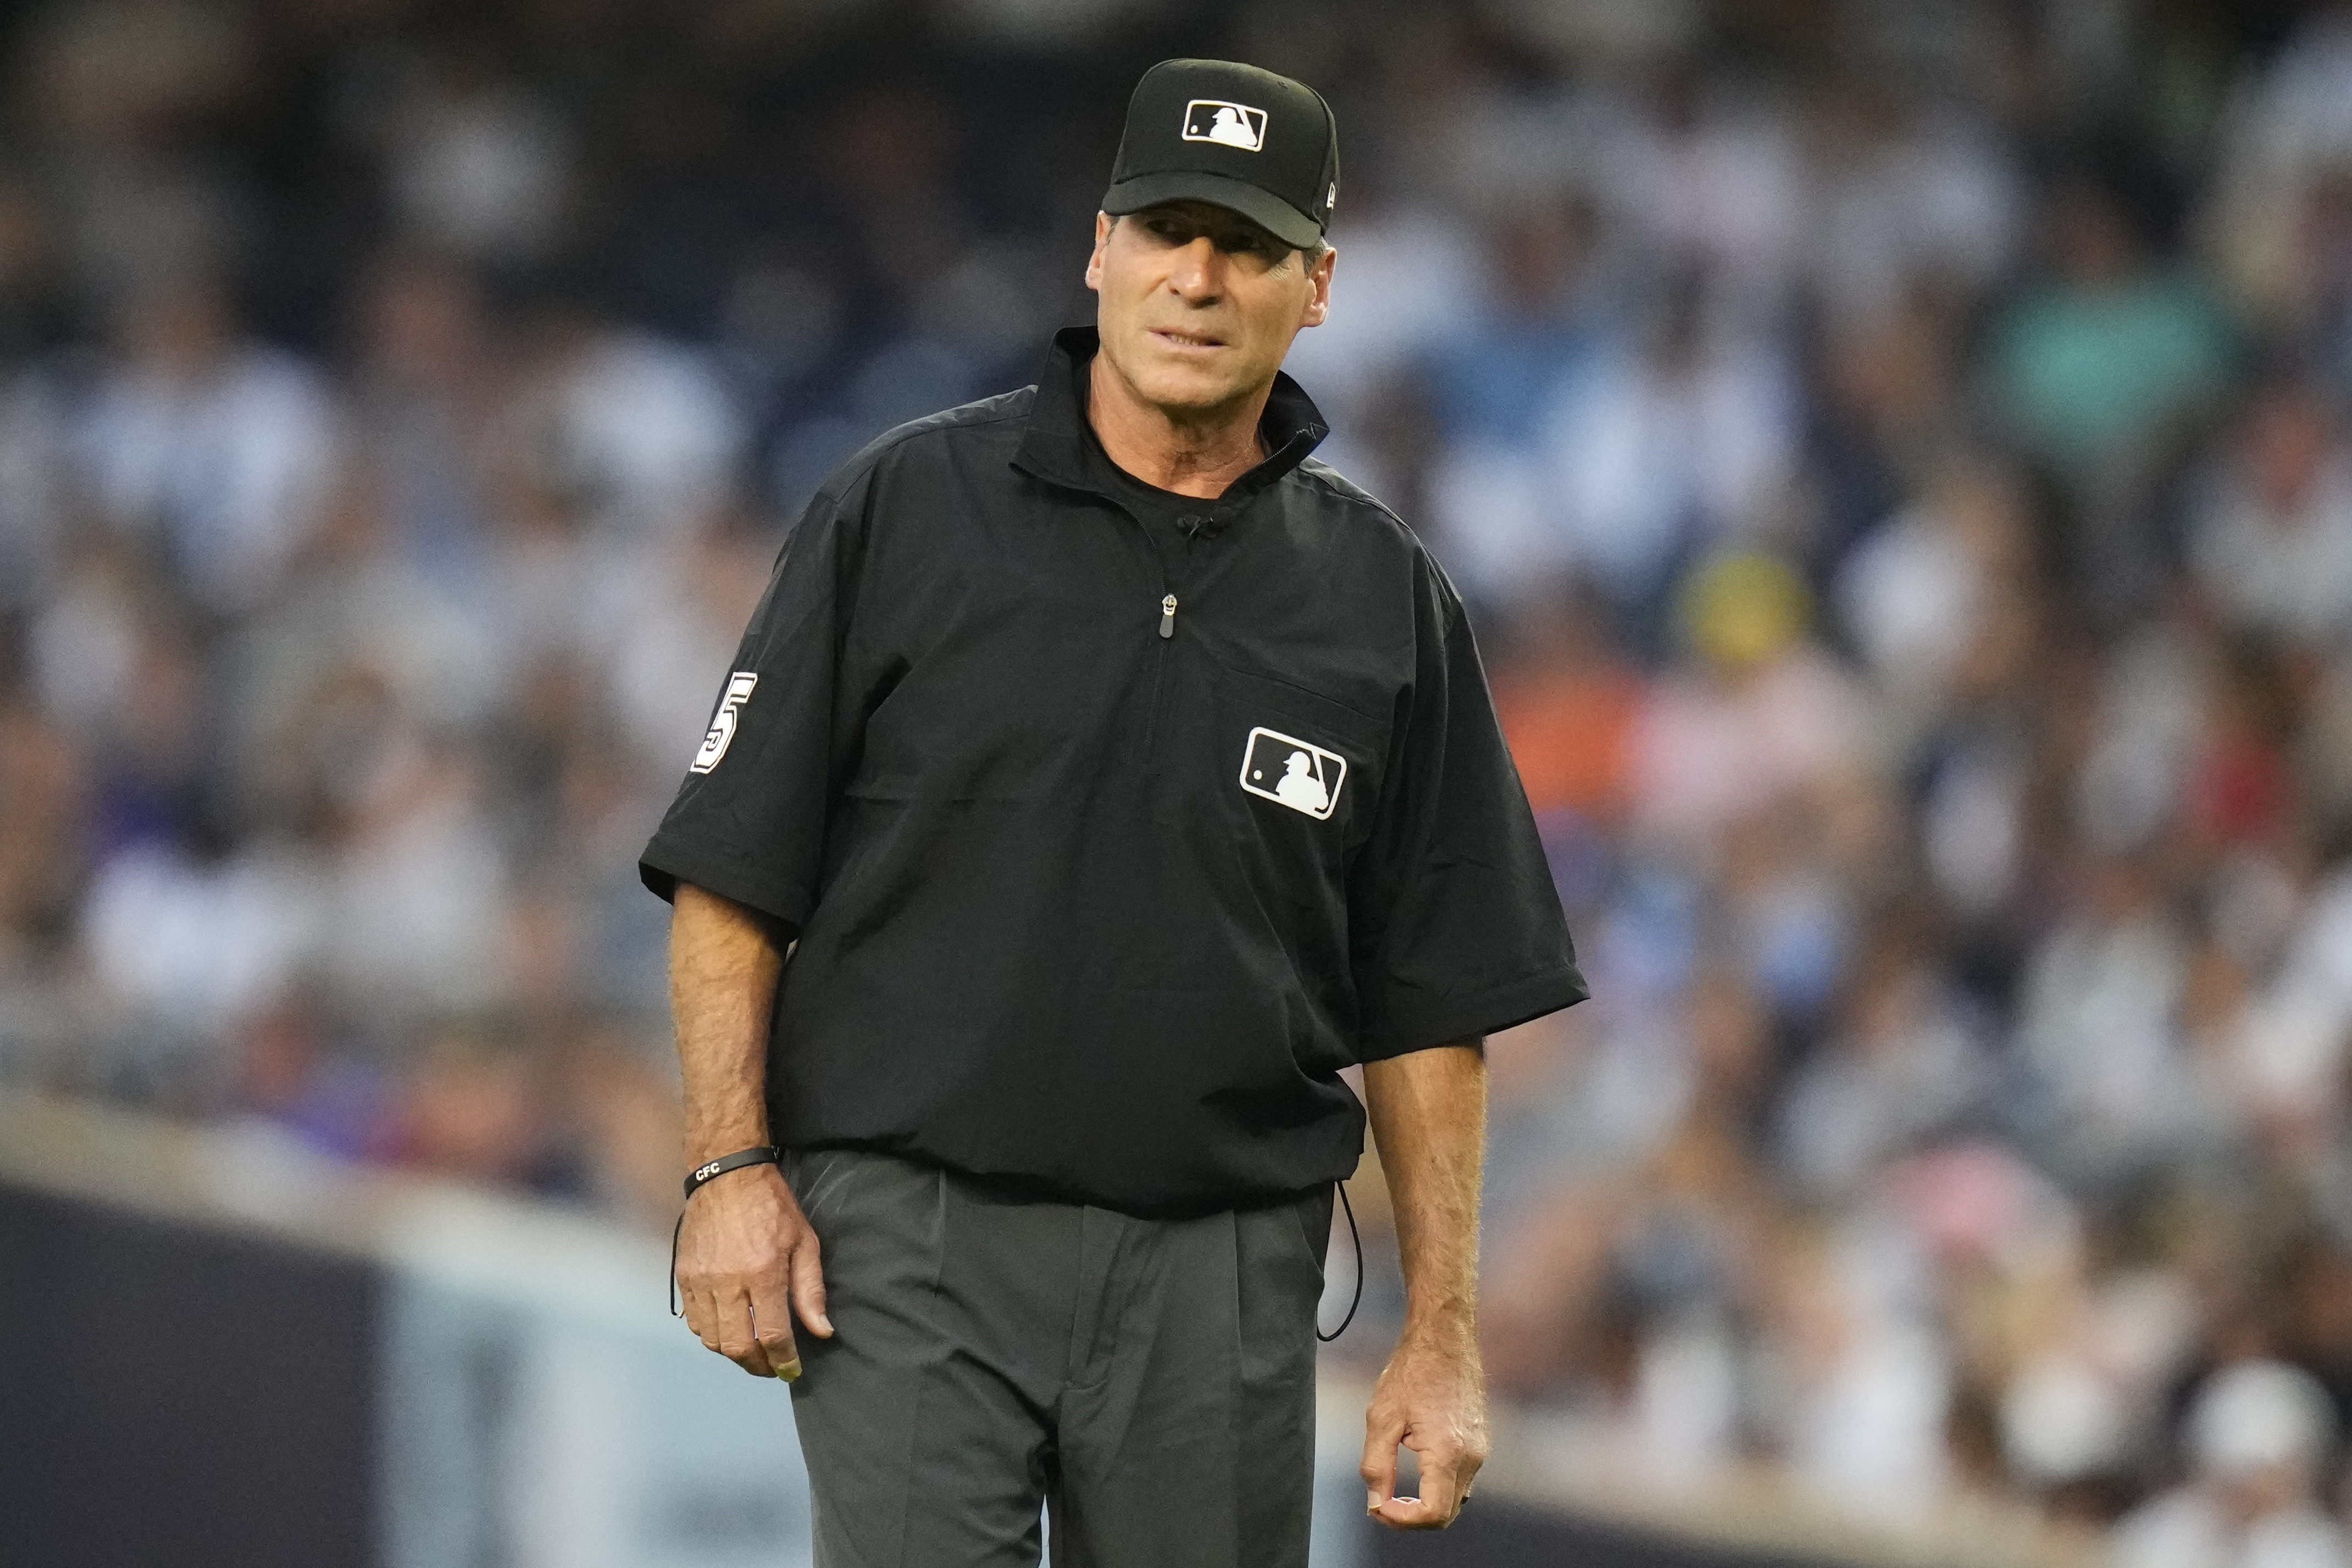 67YearOld Umpire Hospitalized After Being Hit in Head